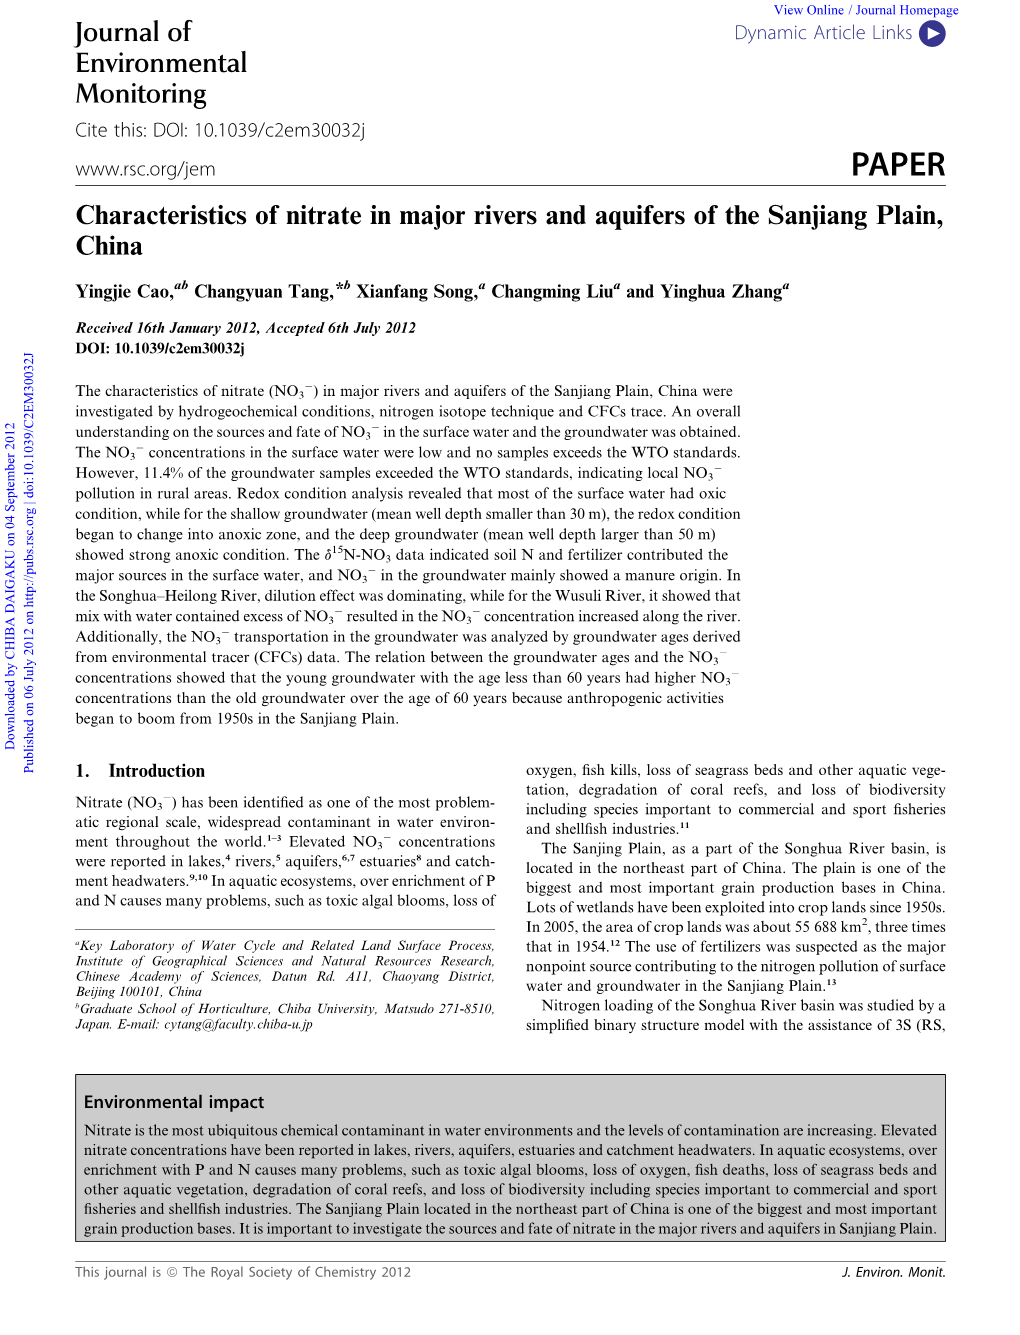 Characteristics of Nitrate in Major Rivers and Aquifers of the Sanjiang Plain, China